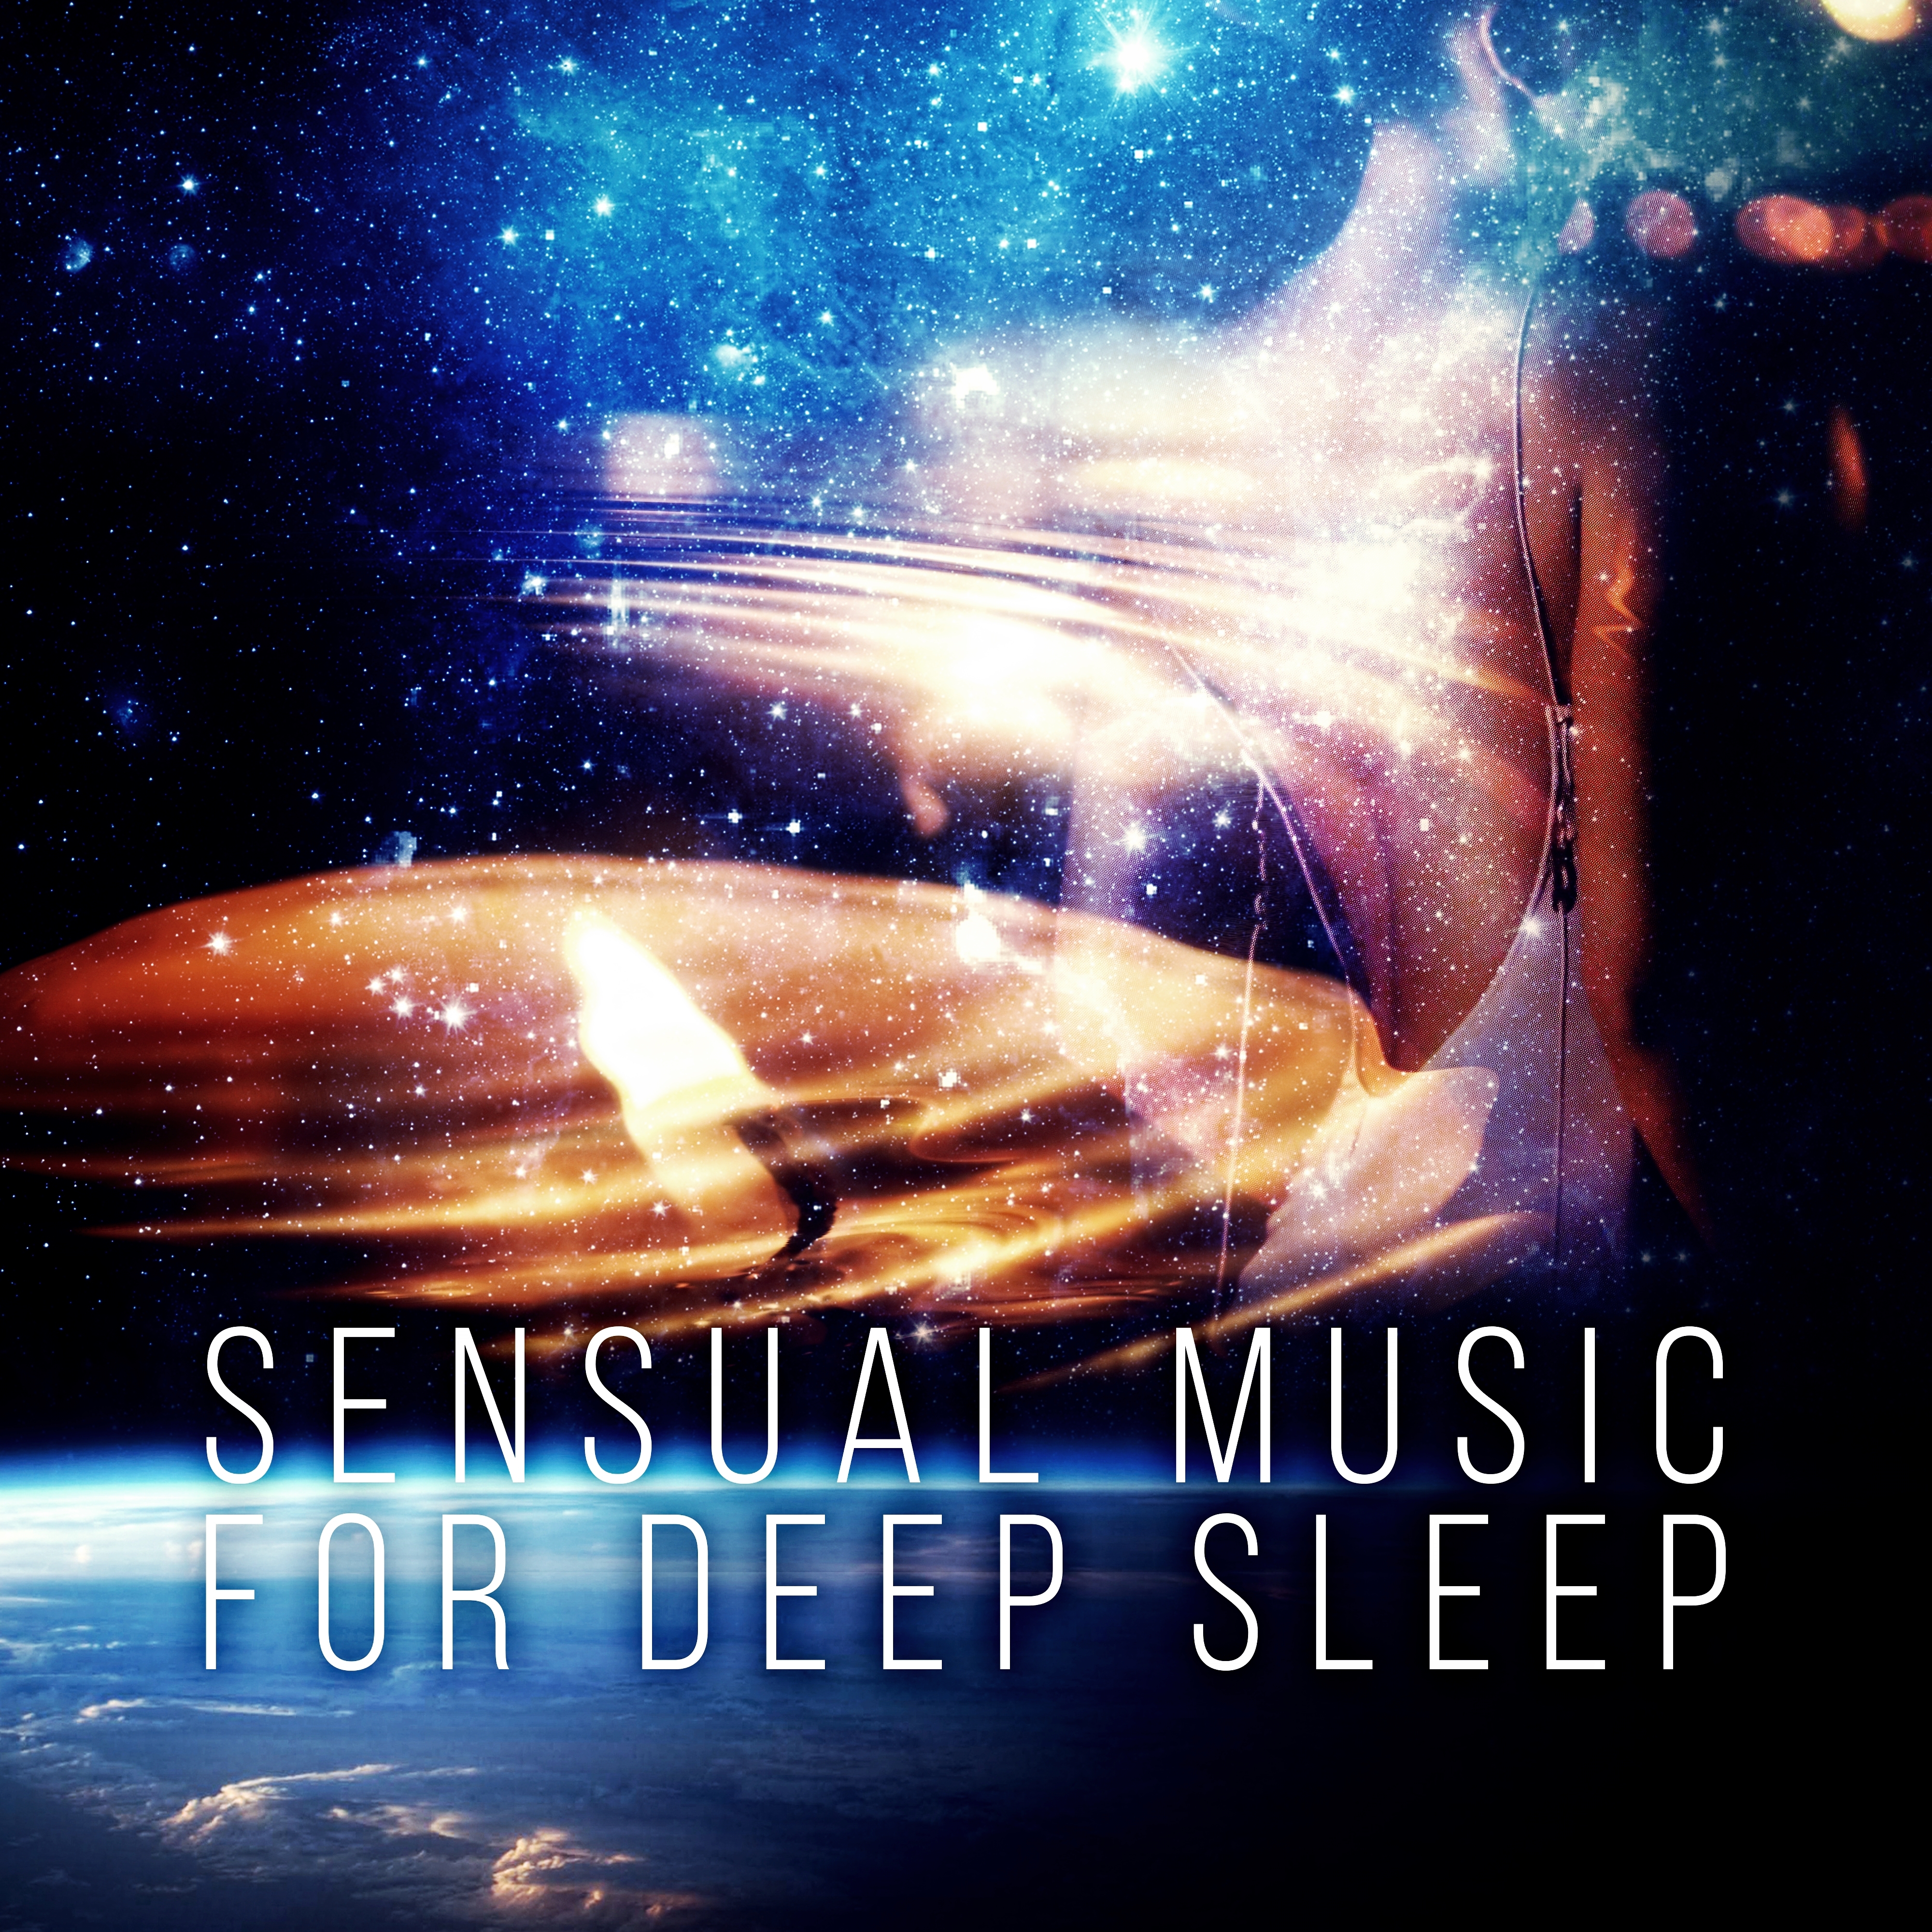 Sensual Music for Deep Sleep - Serenity Lullabies with Relaxing Nature Sounds, Insomnia Therapy, Sleep Music to Help You Relax all Night, Background Music, Relaxing Massage